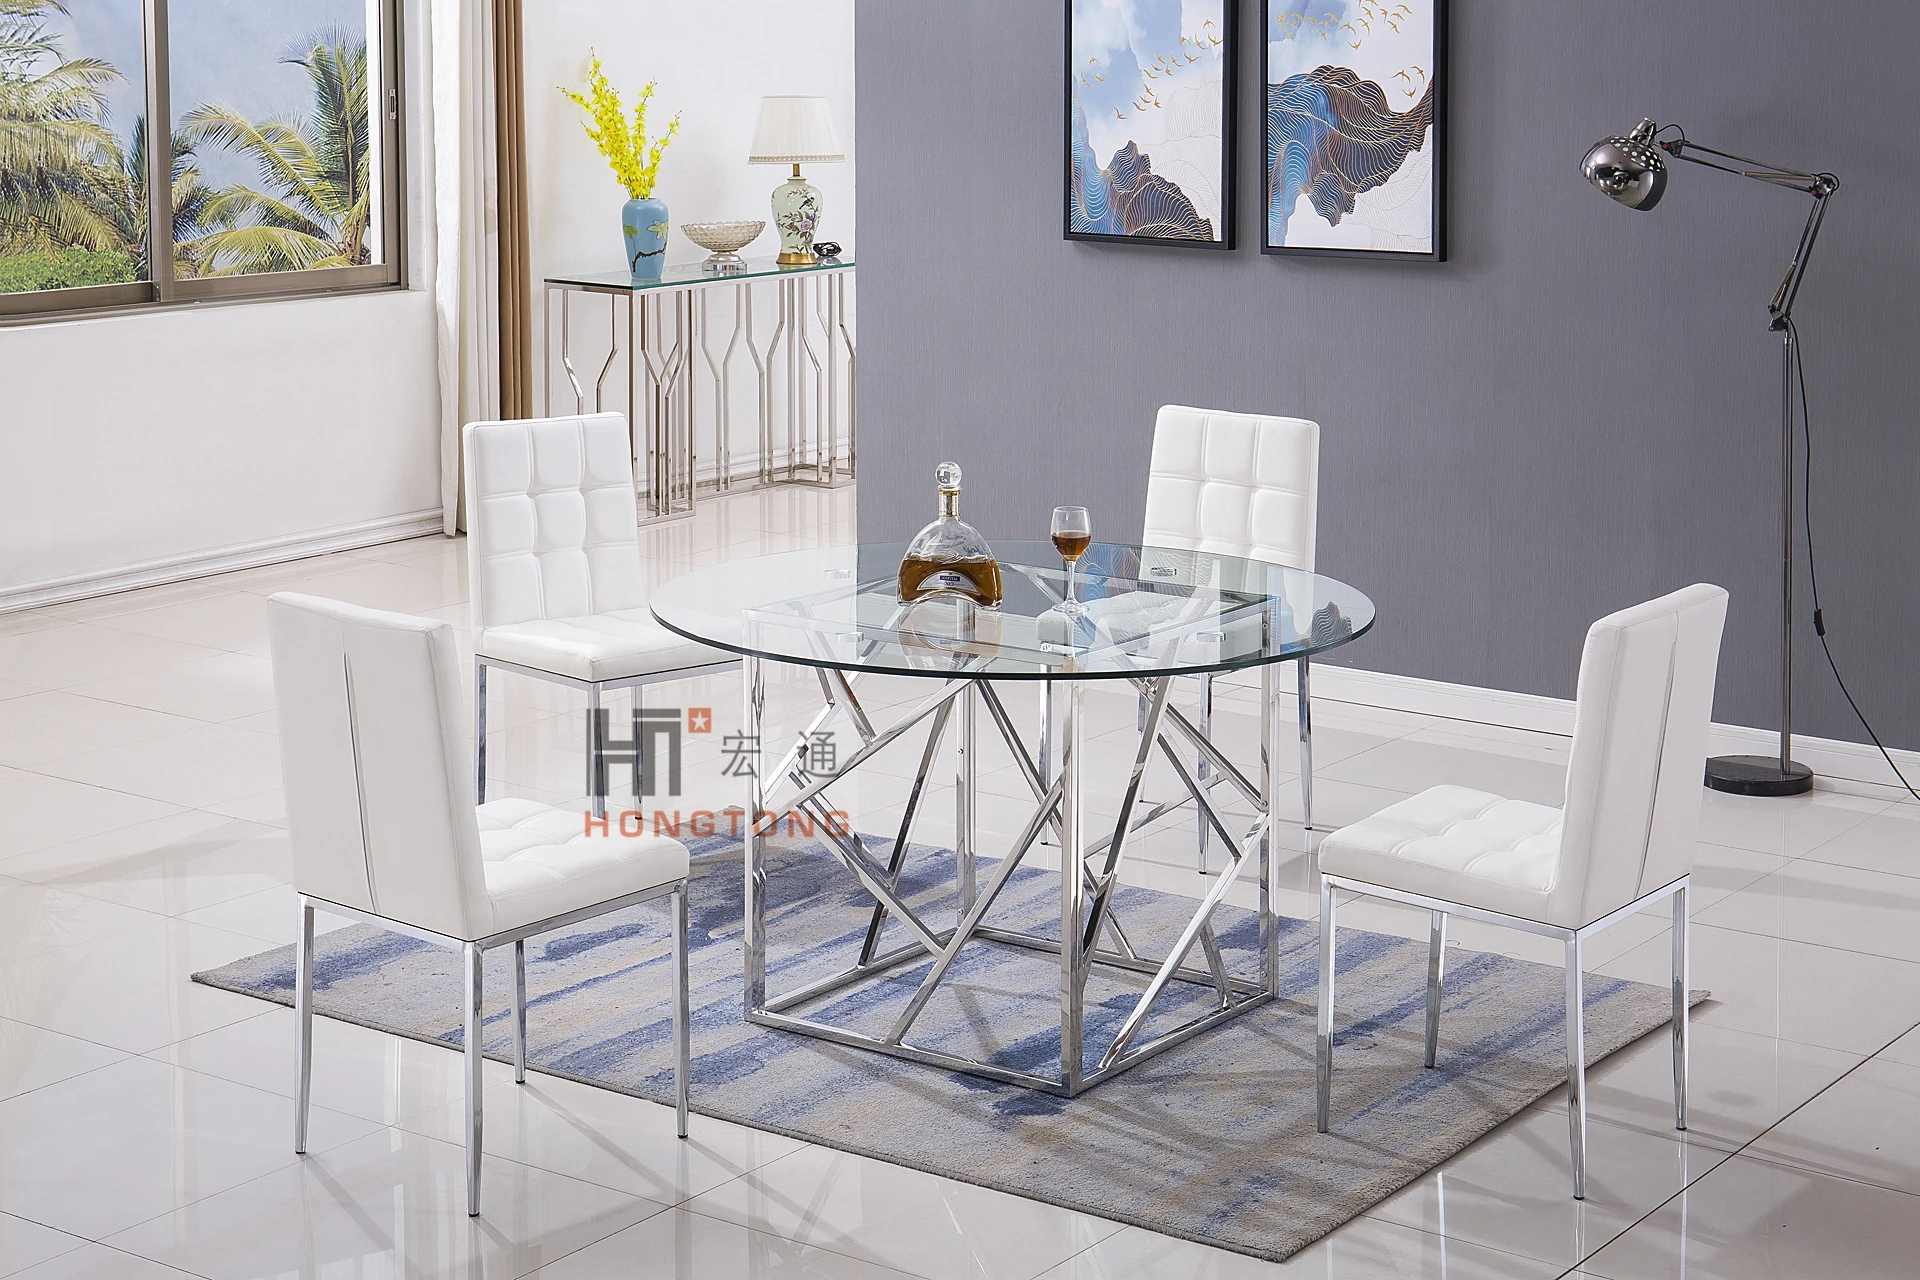 Cheap Small Dining Table Set Stainless Steel Frame With Round Glass Top Buy Cheap Dining Table Set Small Home Dining Table Glass Top Metal Frame Dining Table Product On Alibaba Com